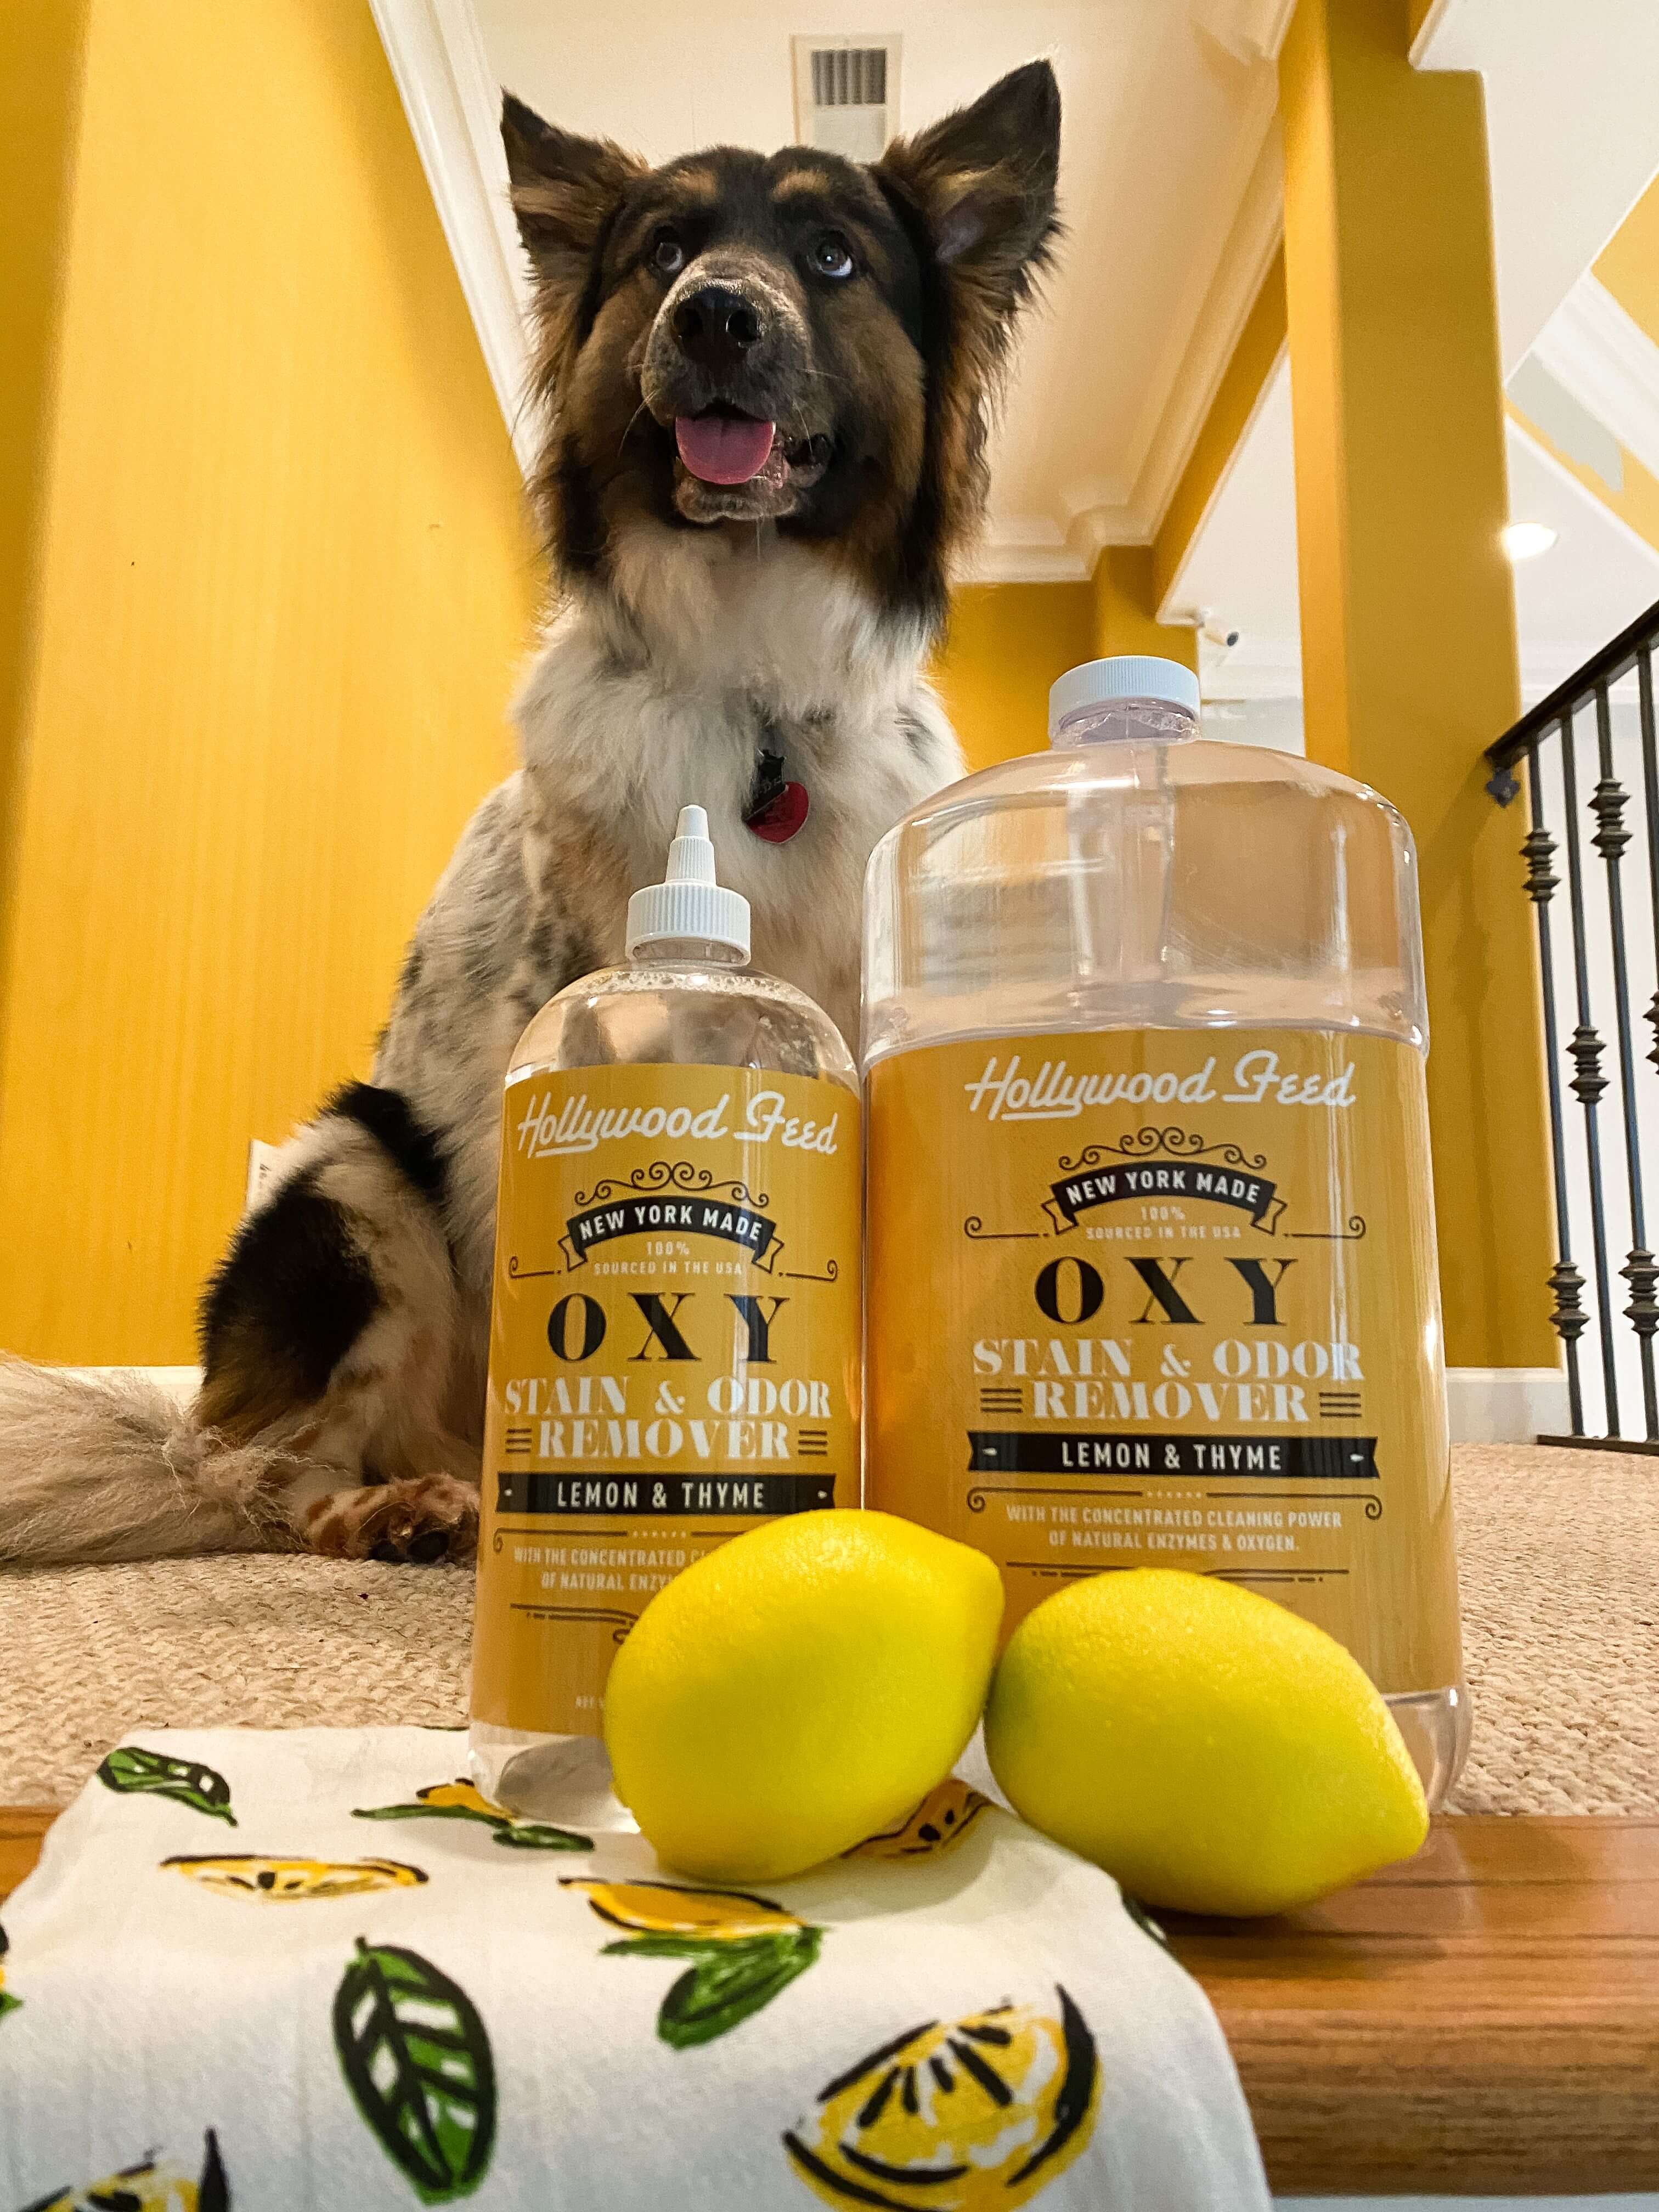 Hollywood Feed New York Made stain and odor remover lemon and thyme oxy floor cleaner